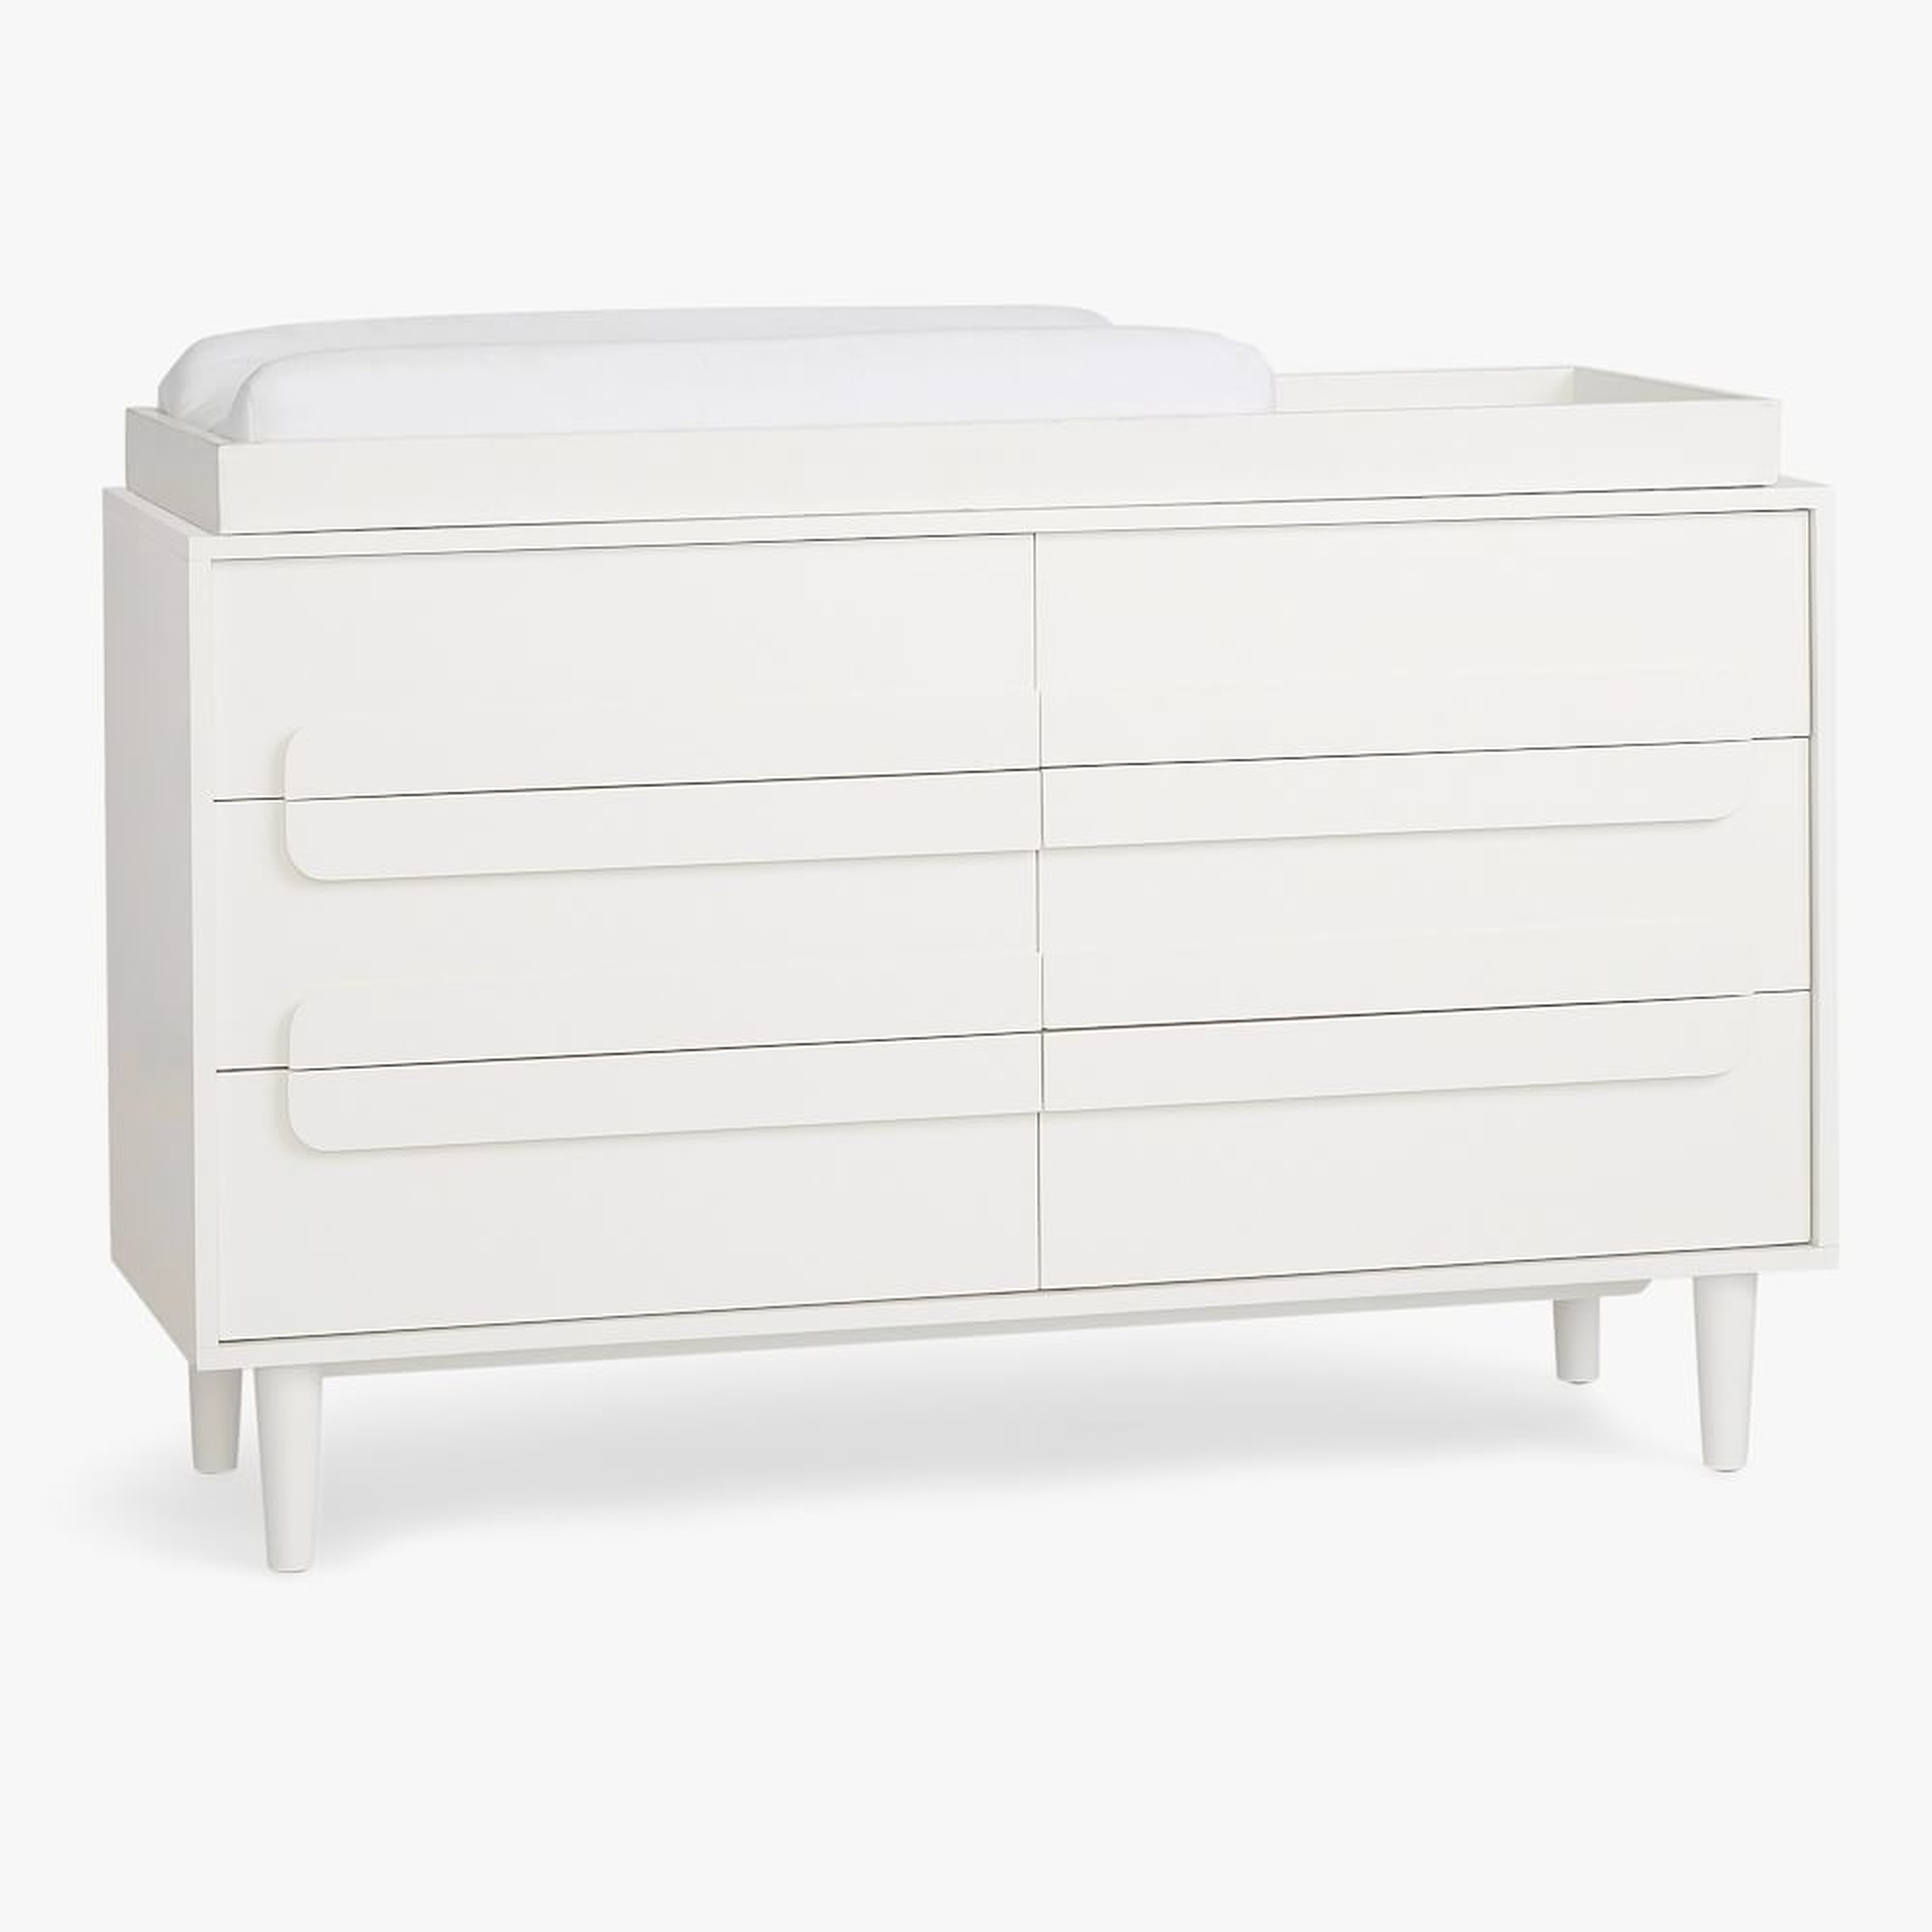 Gemini Changing Table, White, WE Kids - West Elm